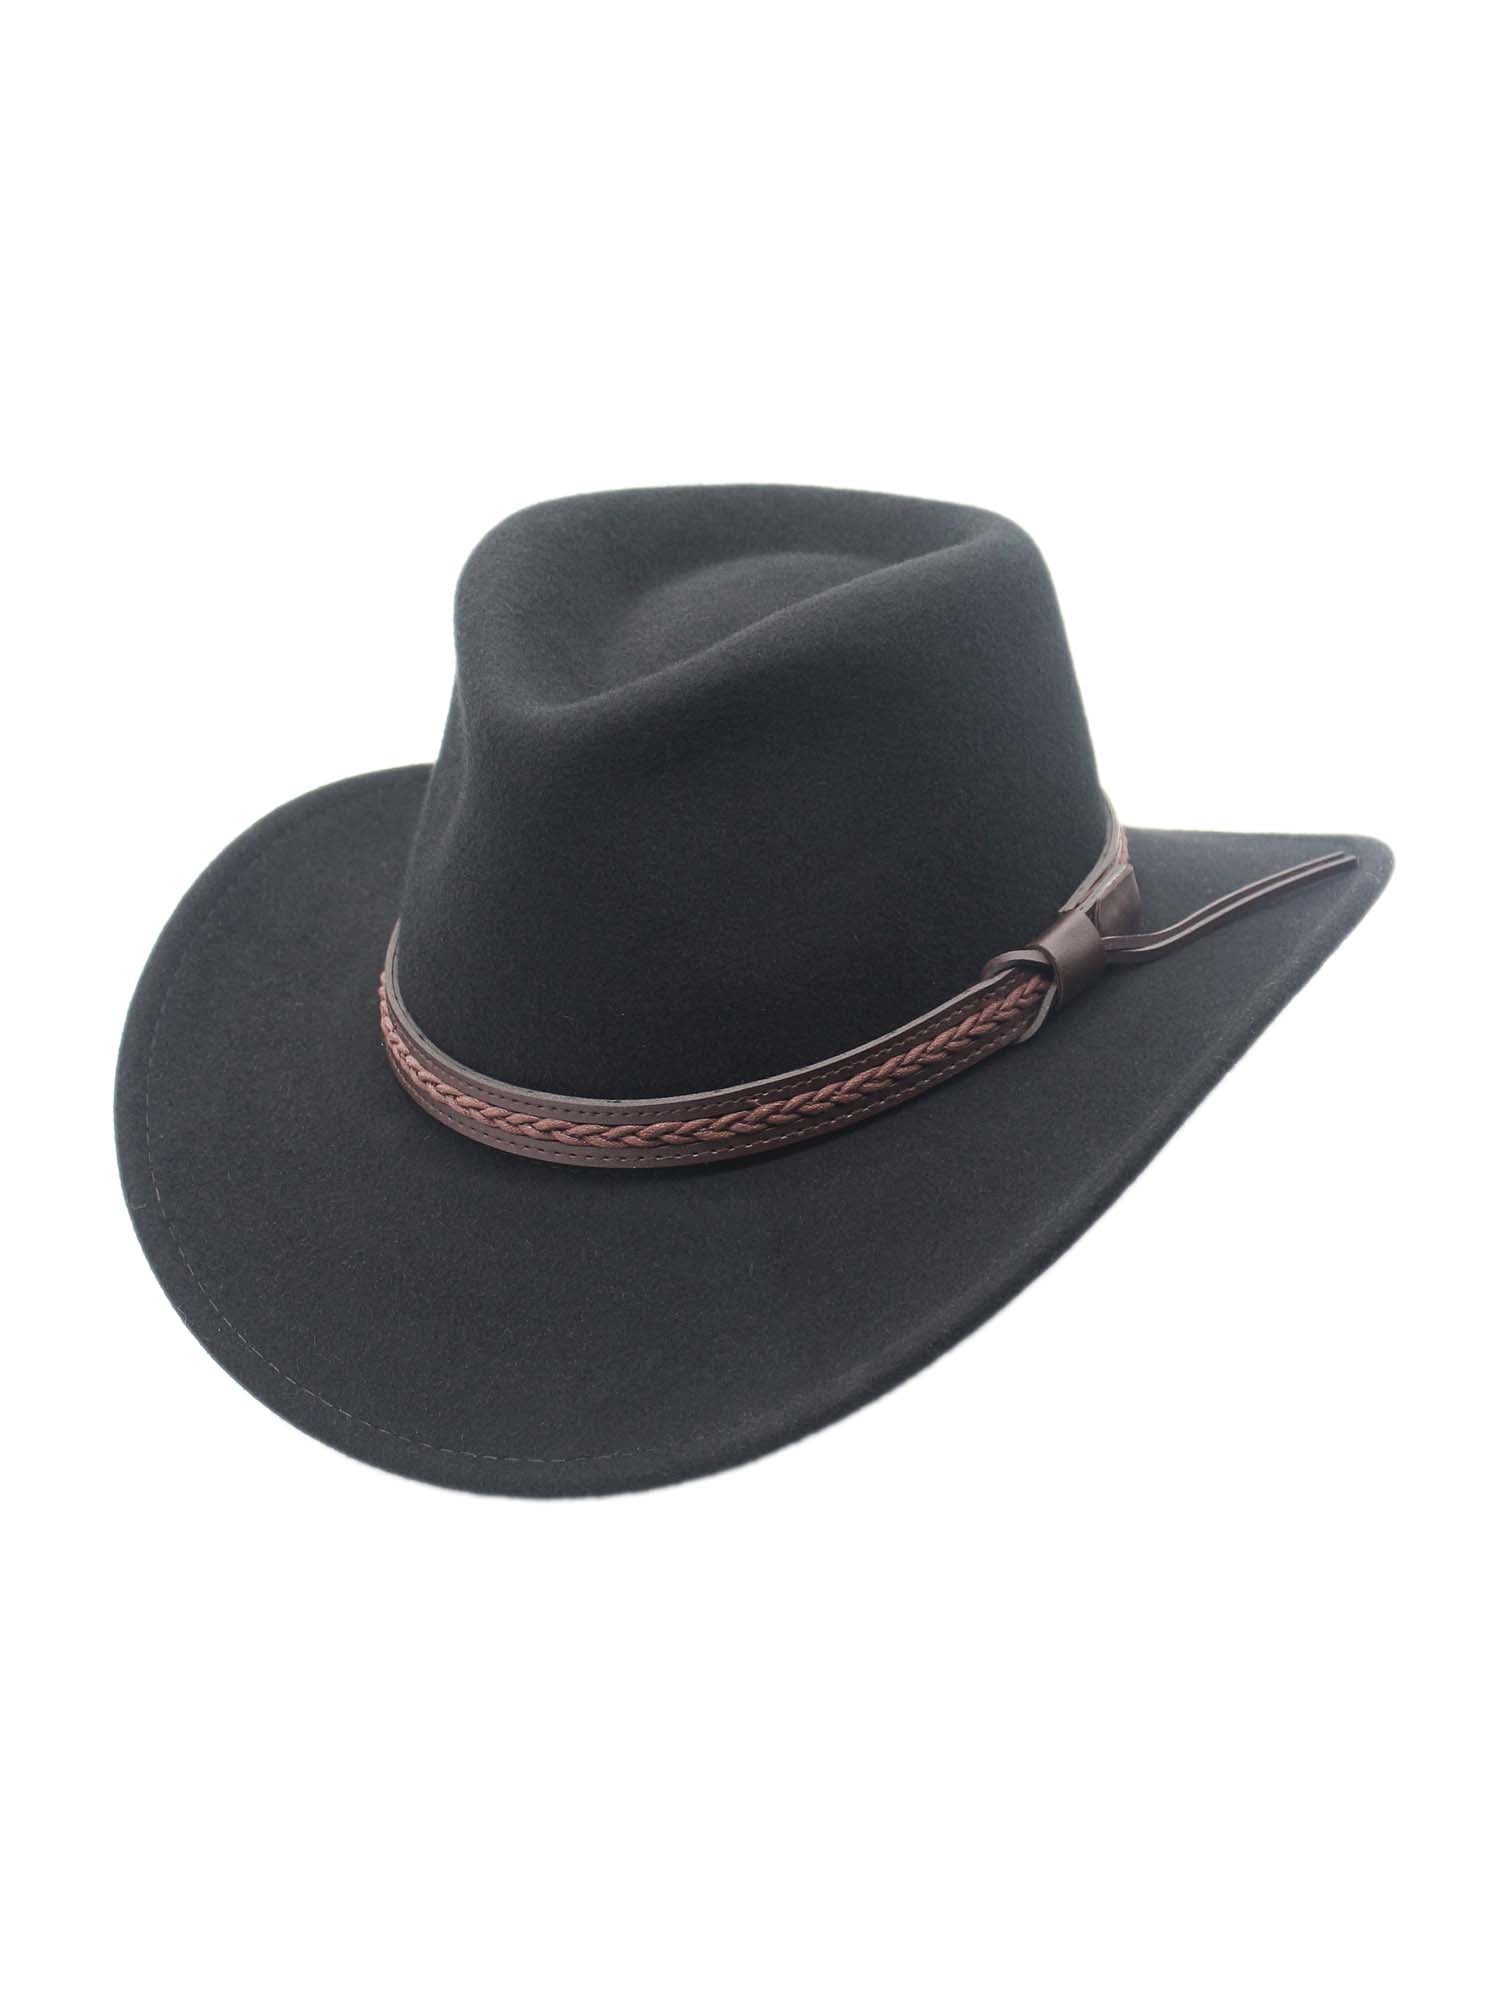 Sturgis Crushable Wool Felt Outback Western Style Cowboy Hat by Silver ...